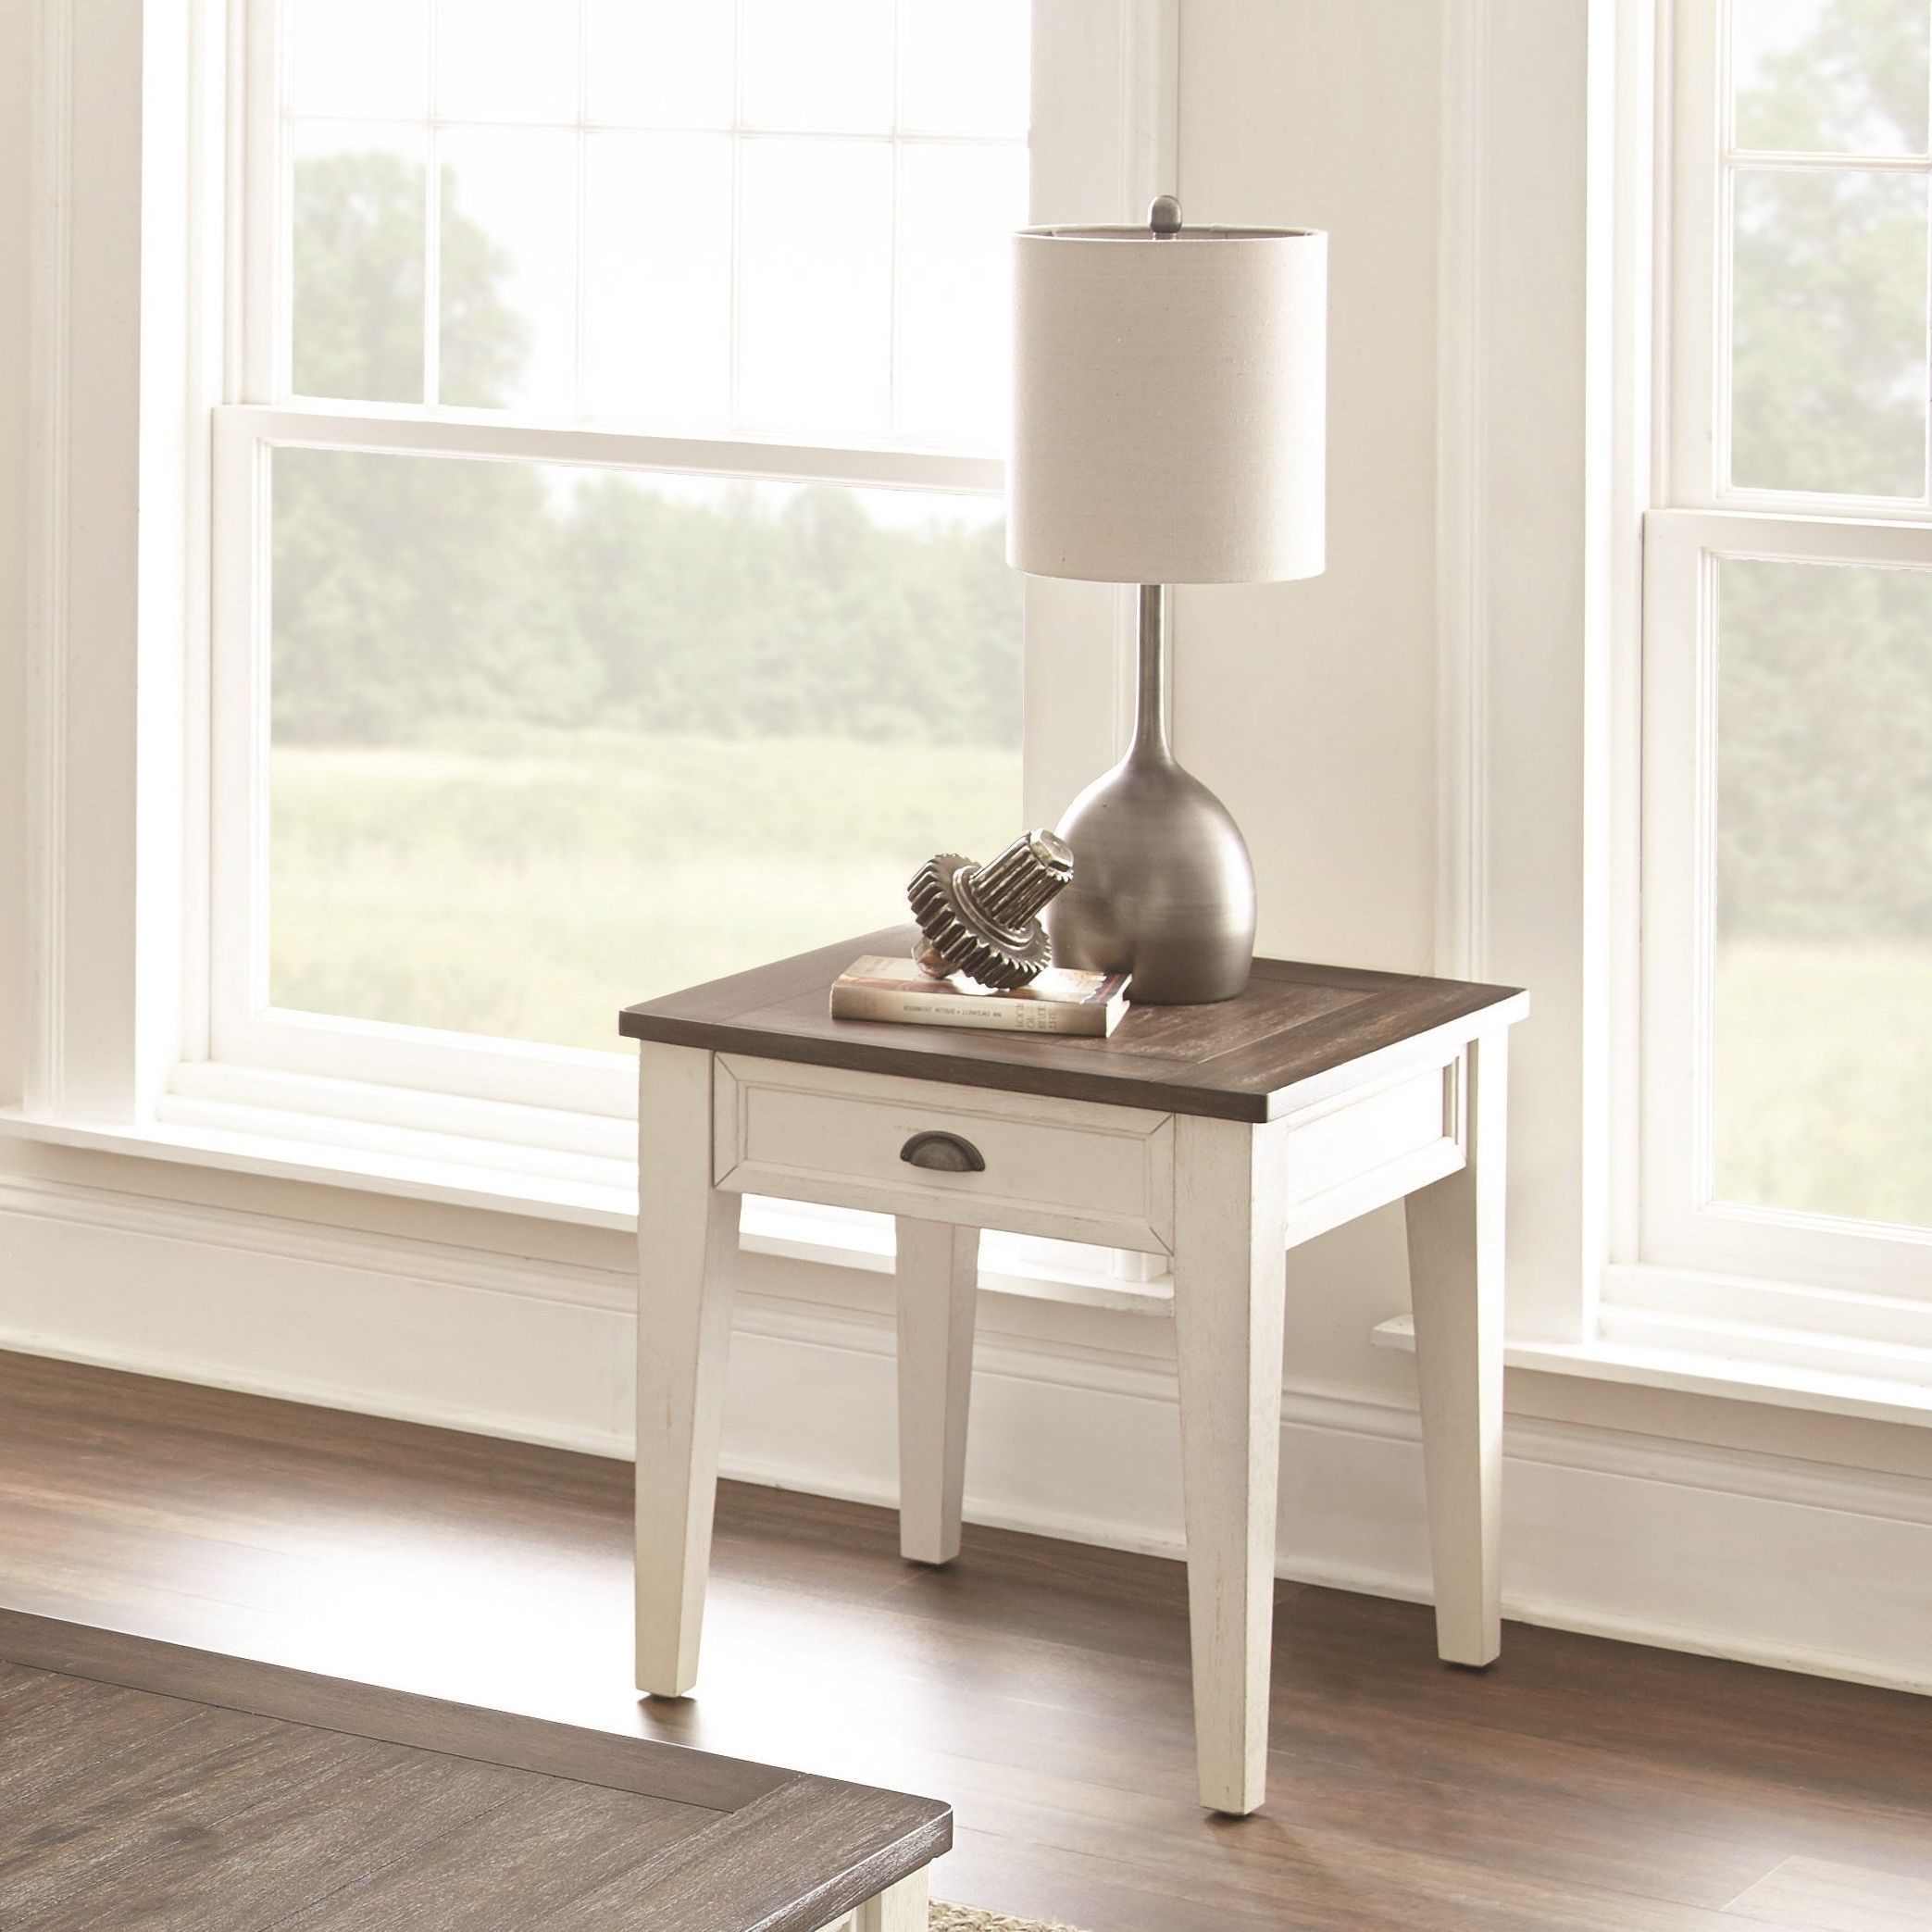 End Tables Intended For 2019 Living Room Farmhouse Coffee Tables (View 10 of 10)